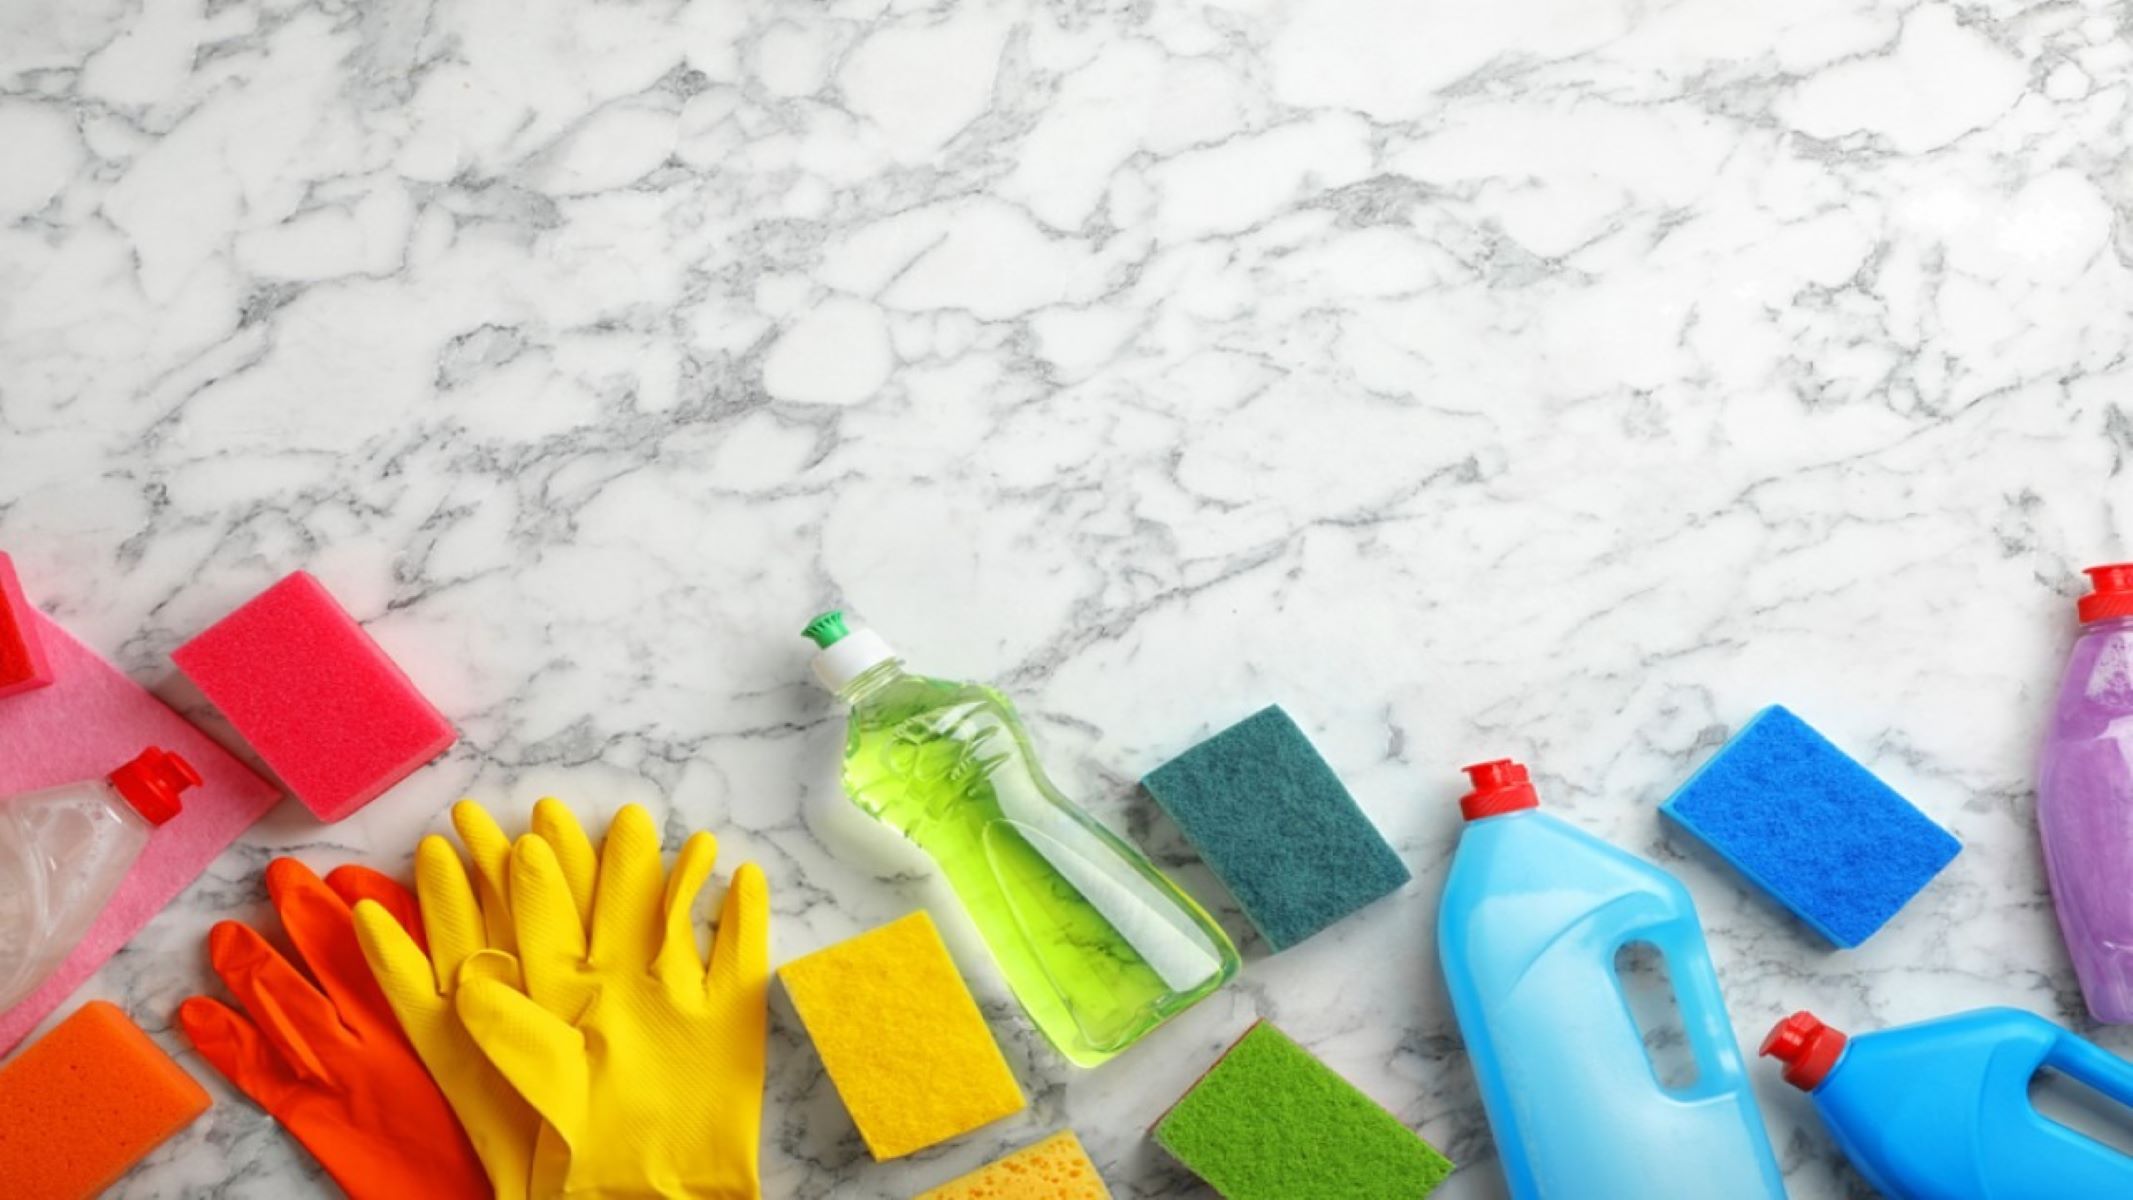 What Do You Use To Clean Marble Countertops